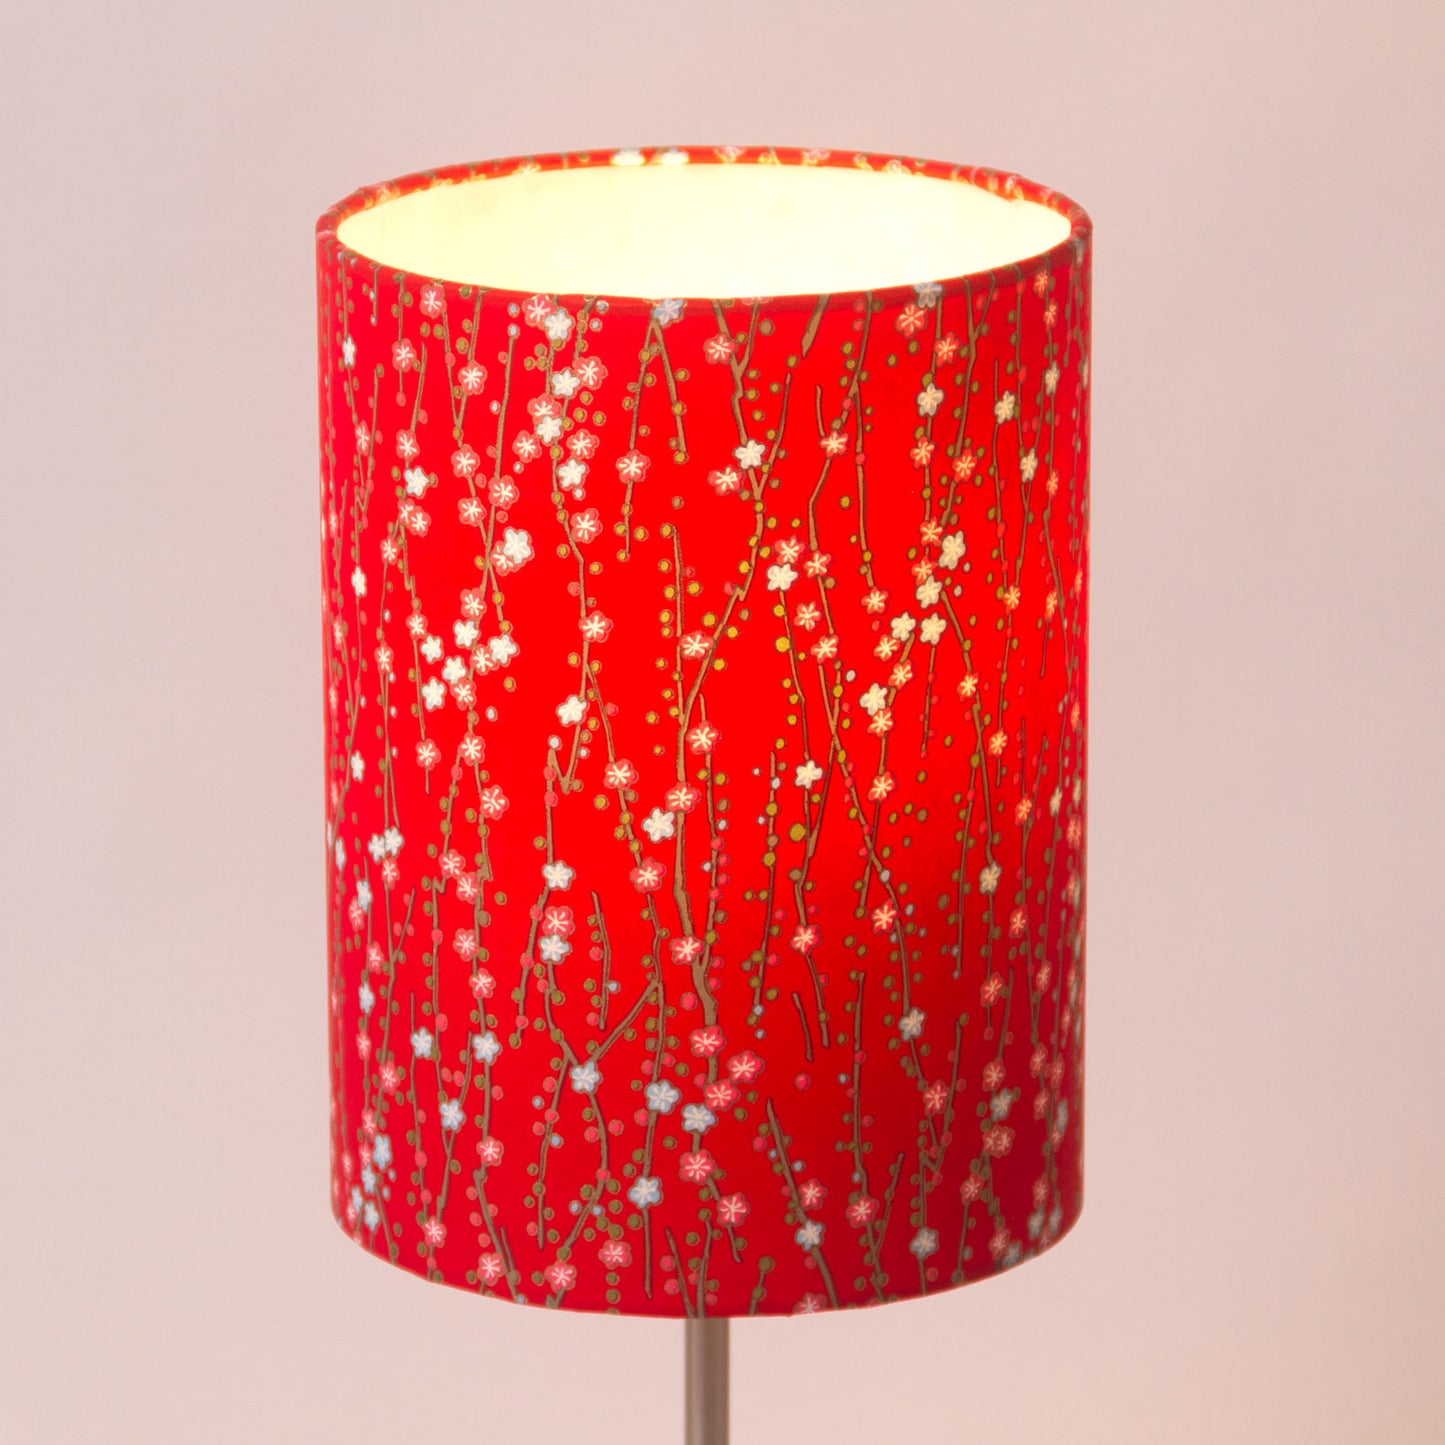 Conical Lamp Shade W01 - Red Daisies, 23cm(top) x 40cm(bottom) x 31cm(height)